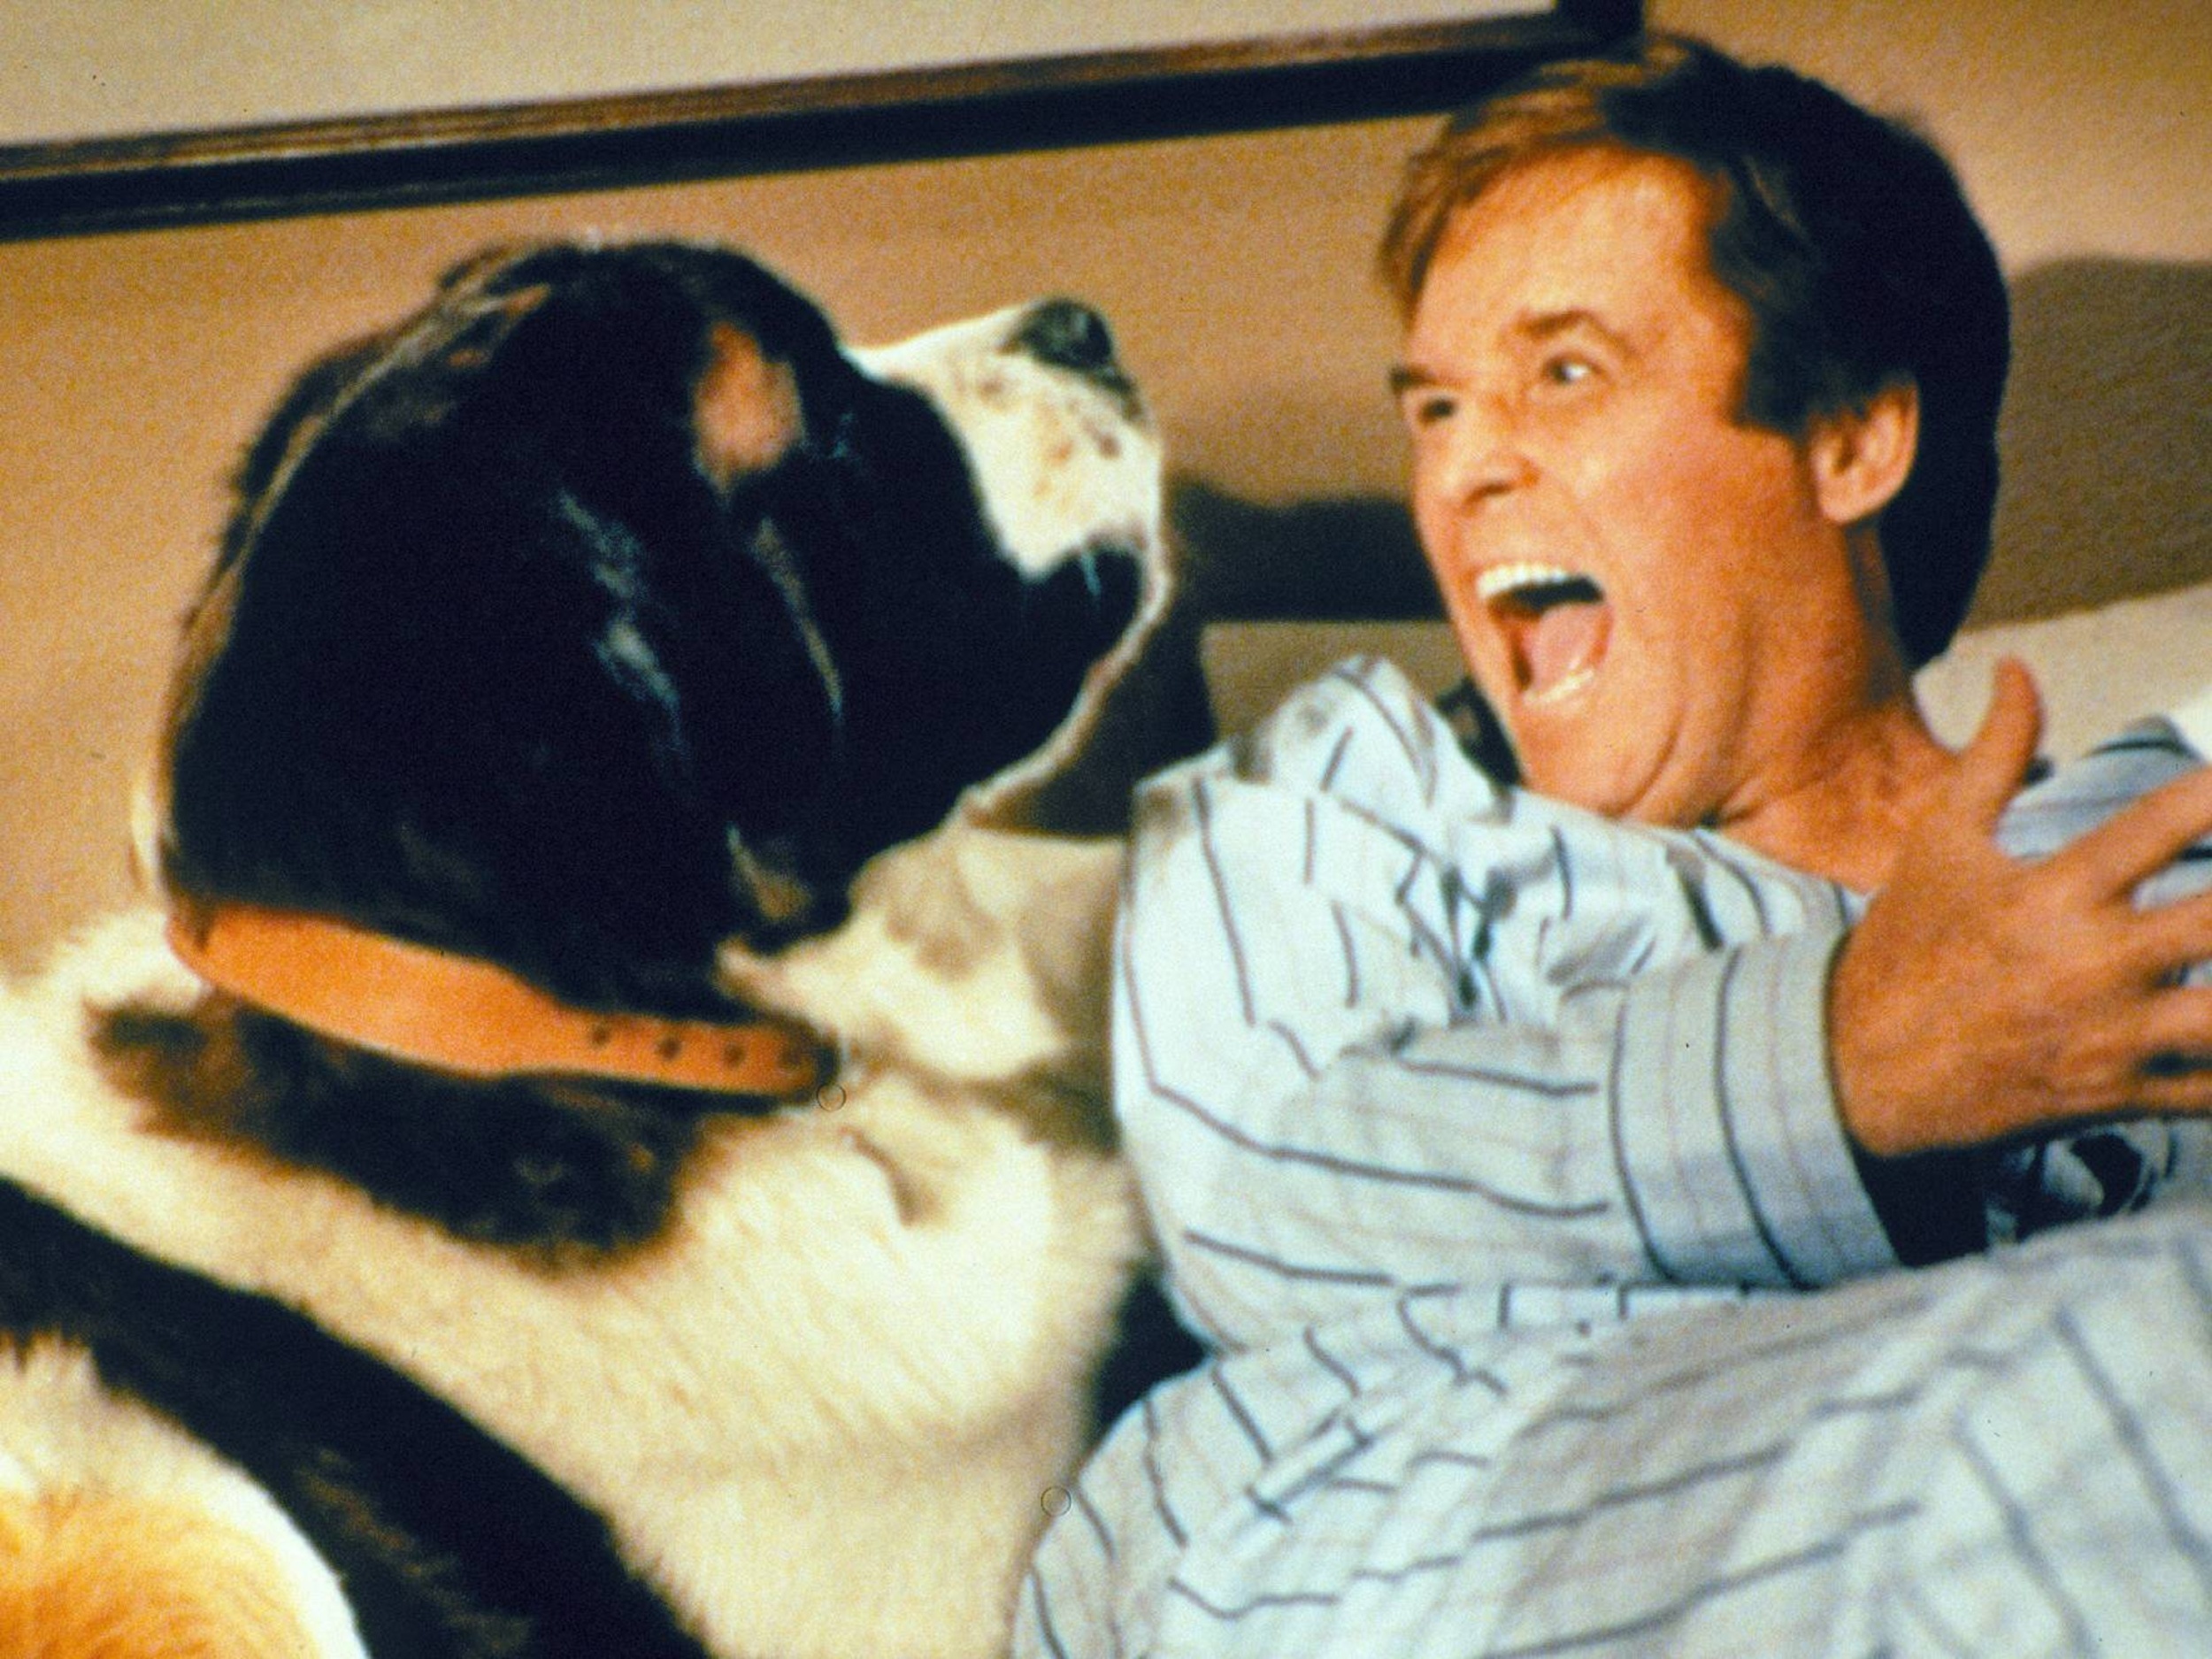 <p>There are no talking dogs in “Beethoven.” Just a gigantic St. Bernard making Charles Grodin miserable. Grodin was perfect casting for a film like this. He plays put-upon dad with gusto against his large, hirsute costar.</p><p><a href='https://www.msn.com/en-us/community/channel/vid-cj9pqbr0vn9in2b6ddcd8sfgpfq6x6utp44fssrv6mc2gtybw0us'>Follow us on MSN to see more of our exclusive entertainment content.</a></p>